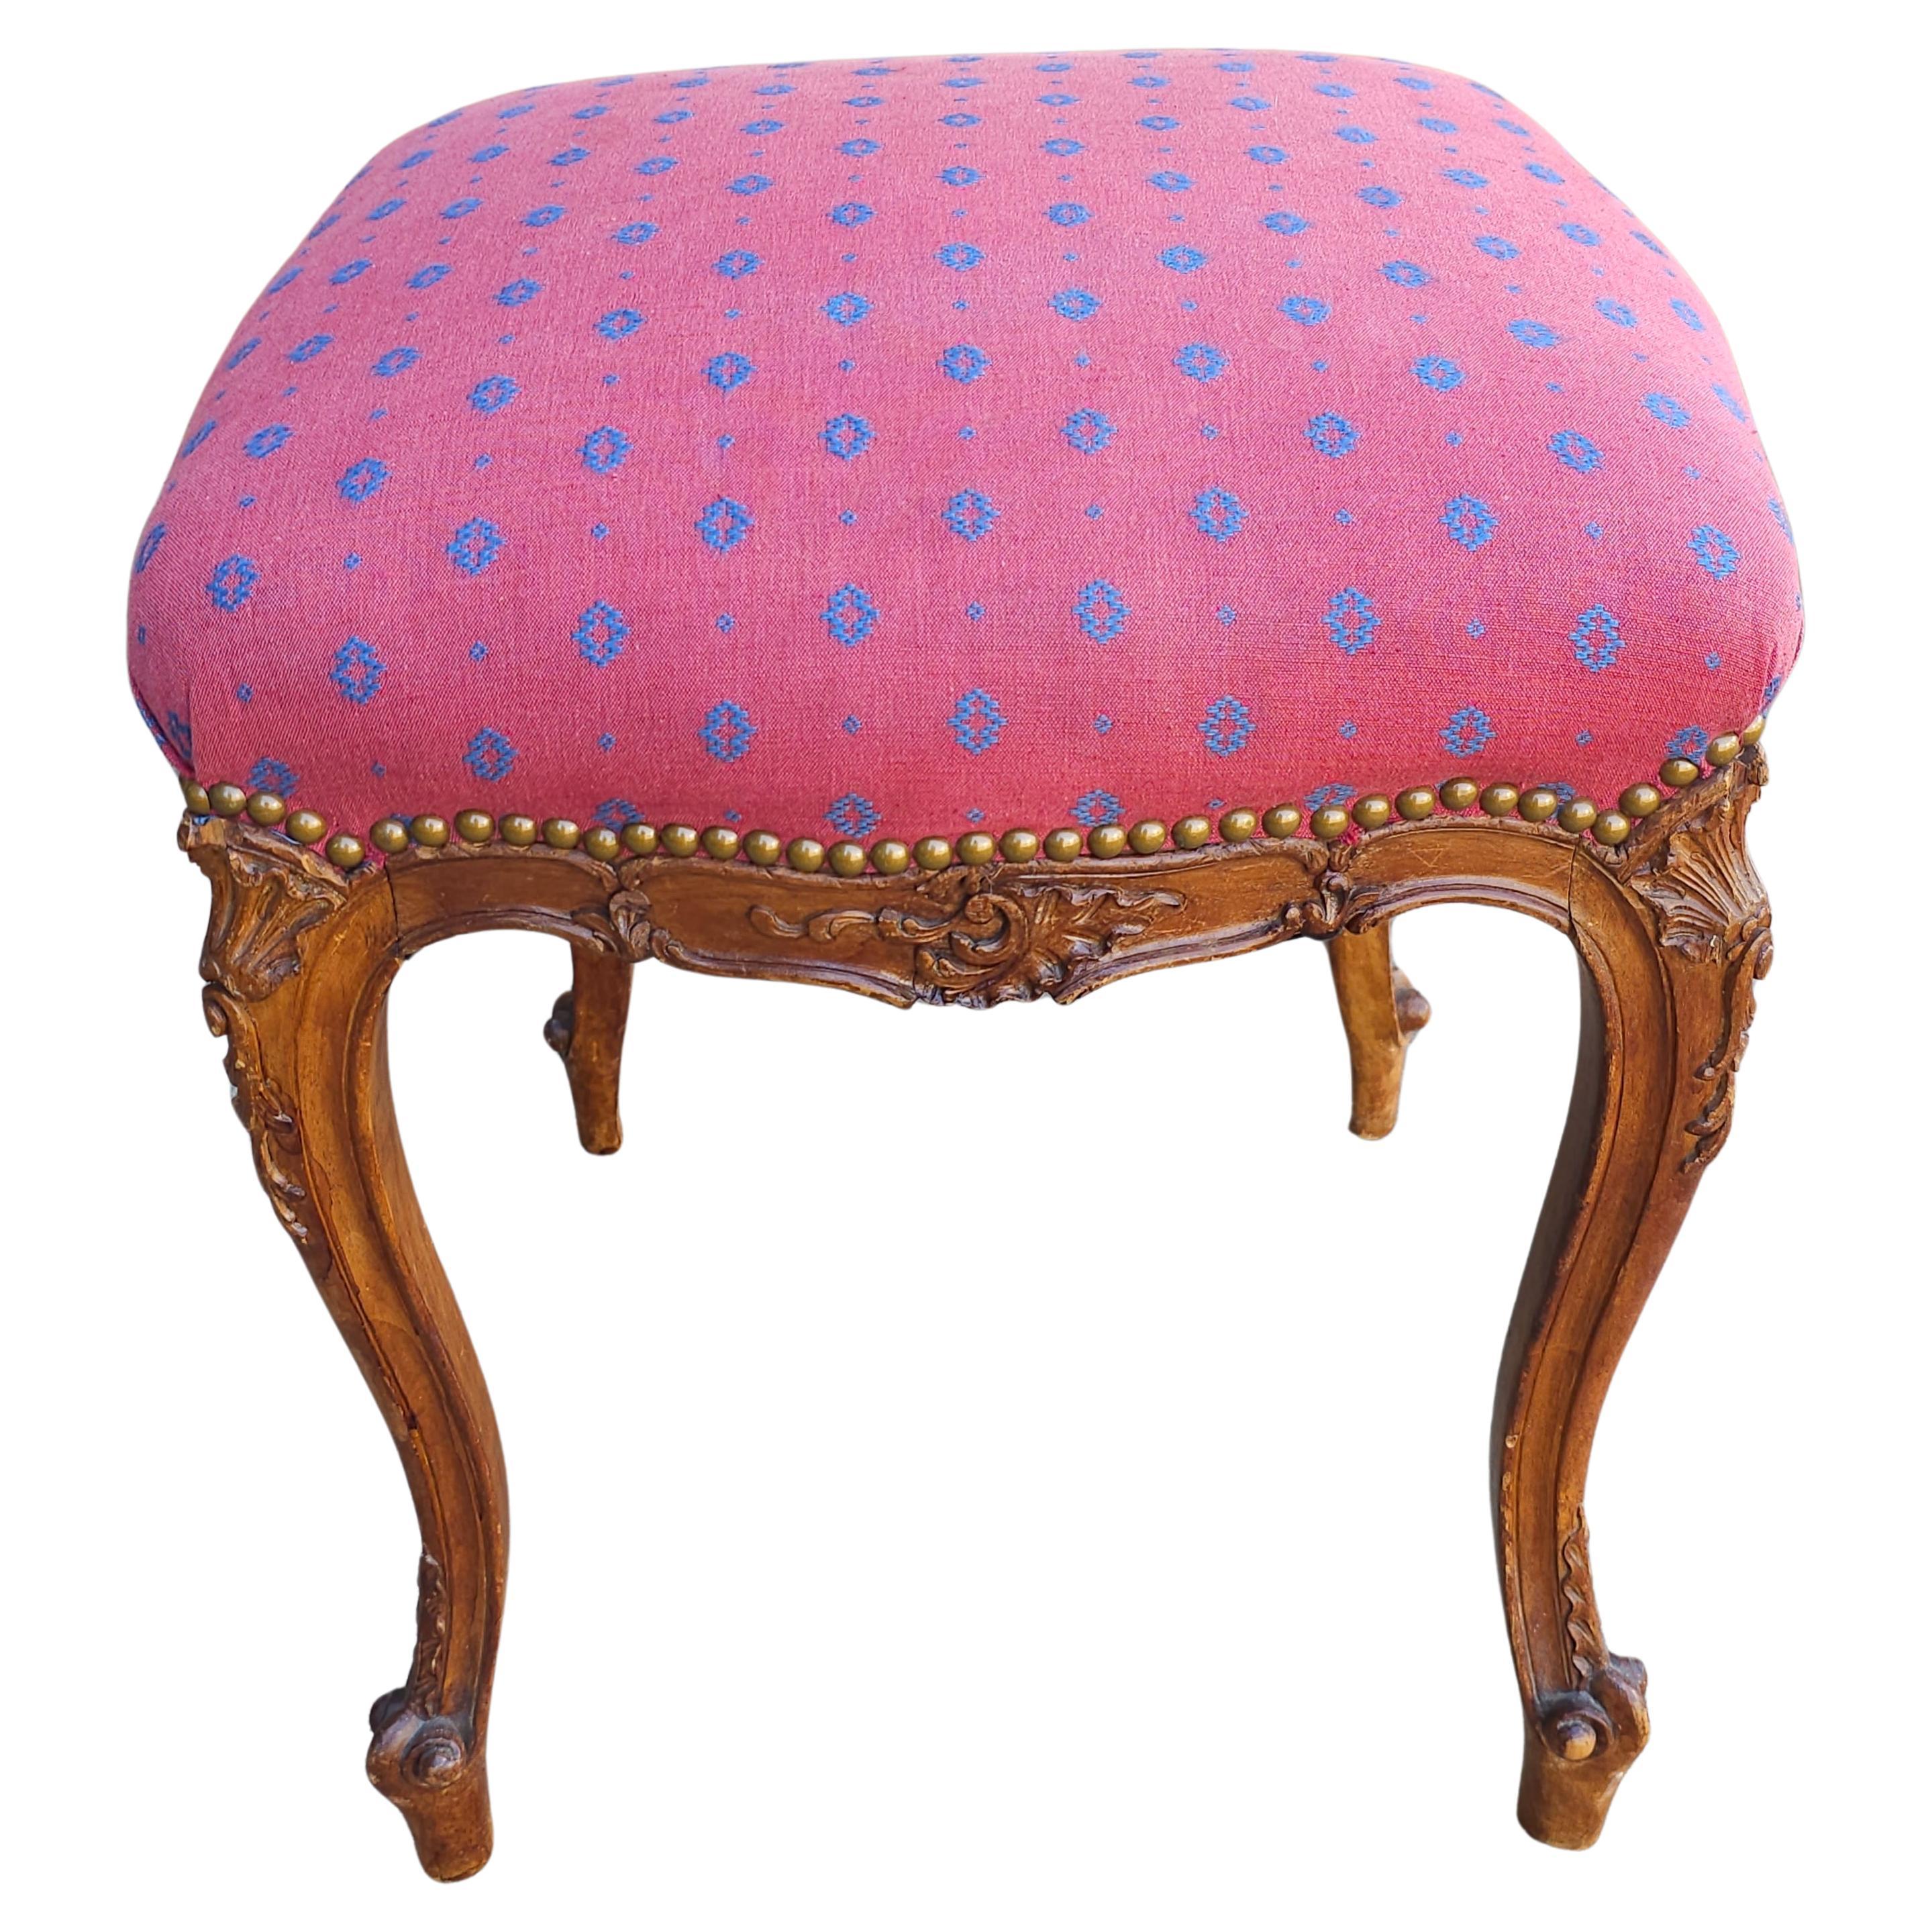 Early 20th C. Louis XV Carved Fruitwood Brass Nail Studded And Upholstered Stool For Sale